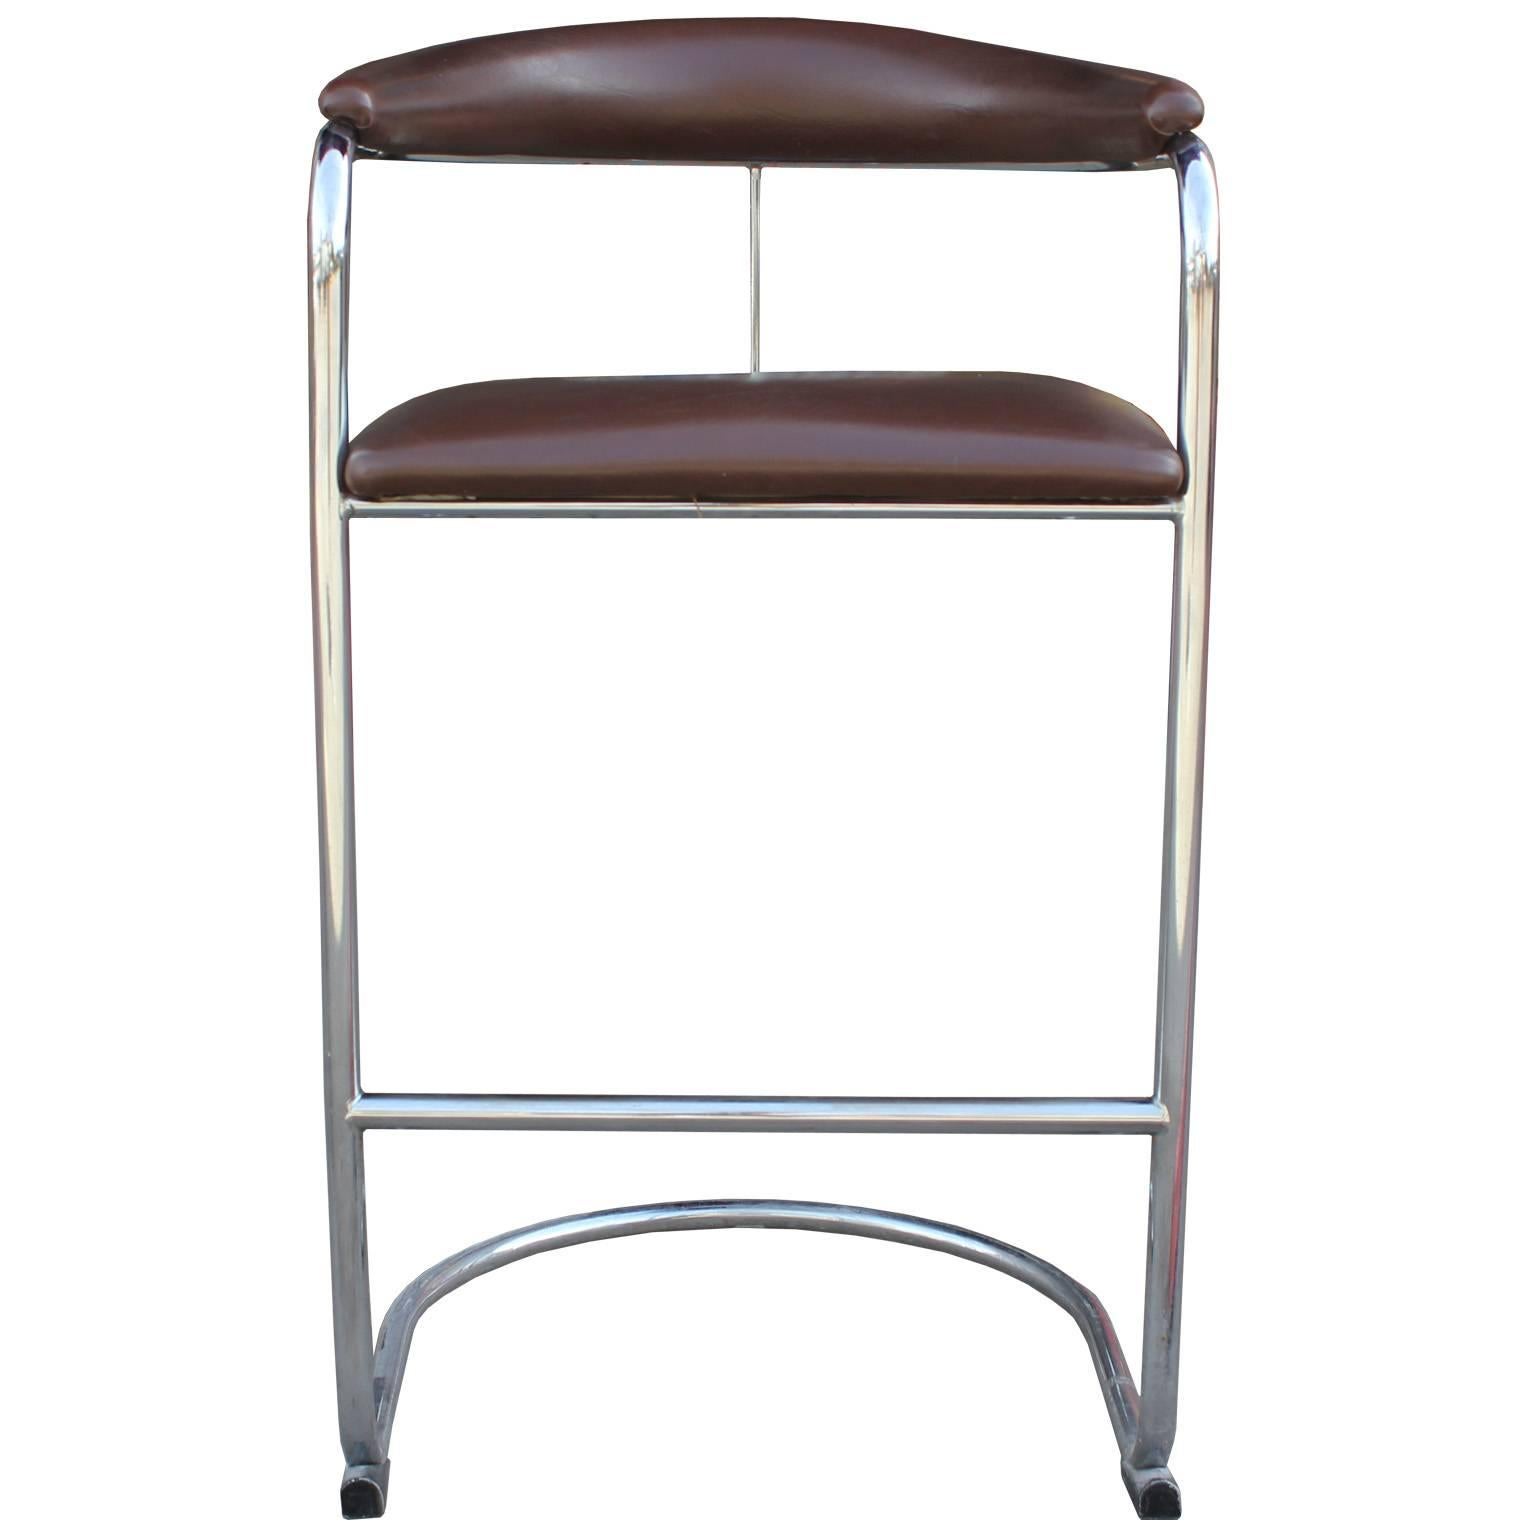 Great set of three brown leather and chrome thonet barstools. These are bar height and in excellent vintage condition, 1970s.